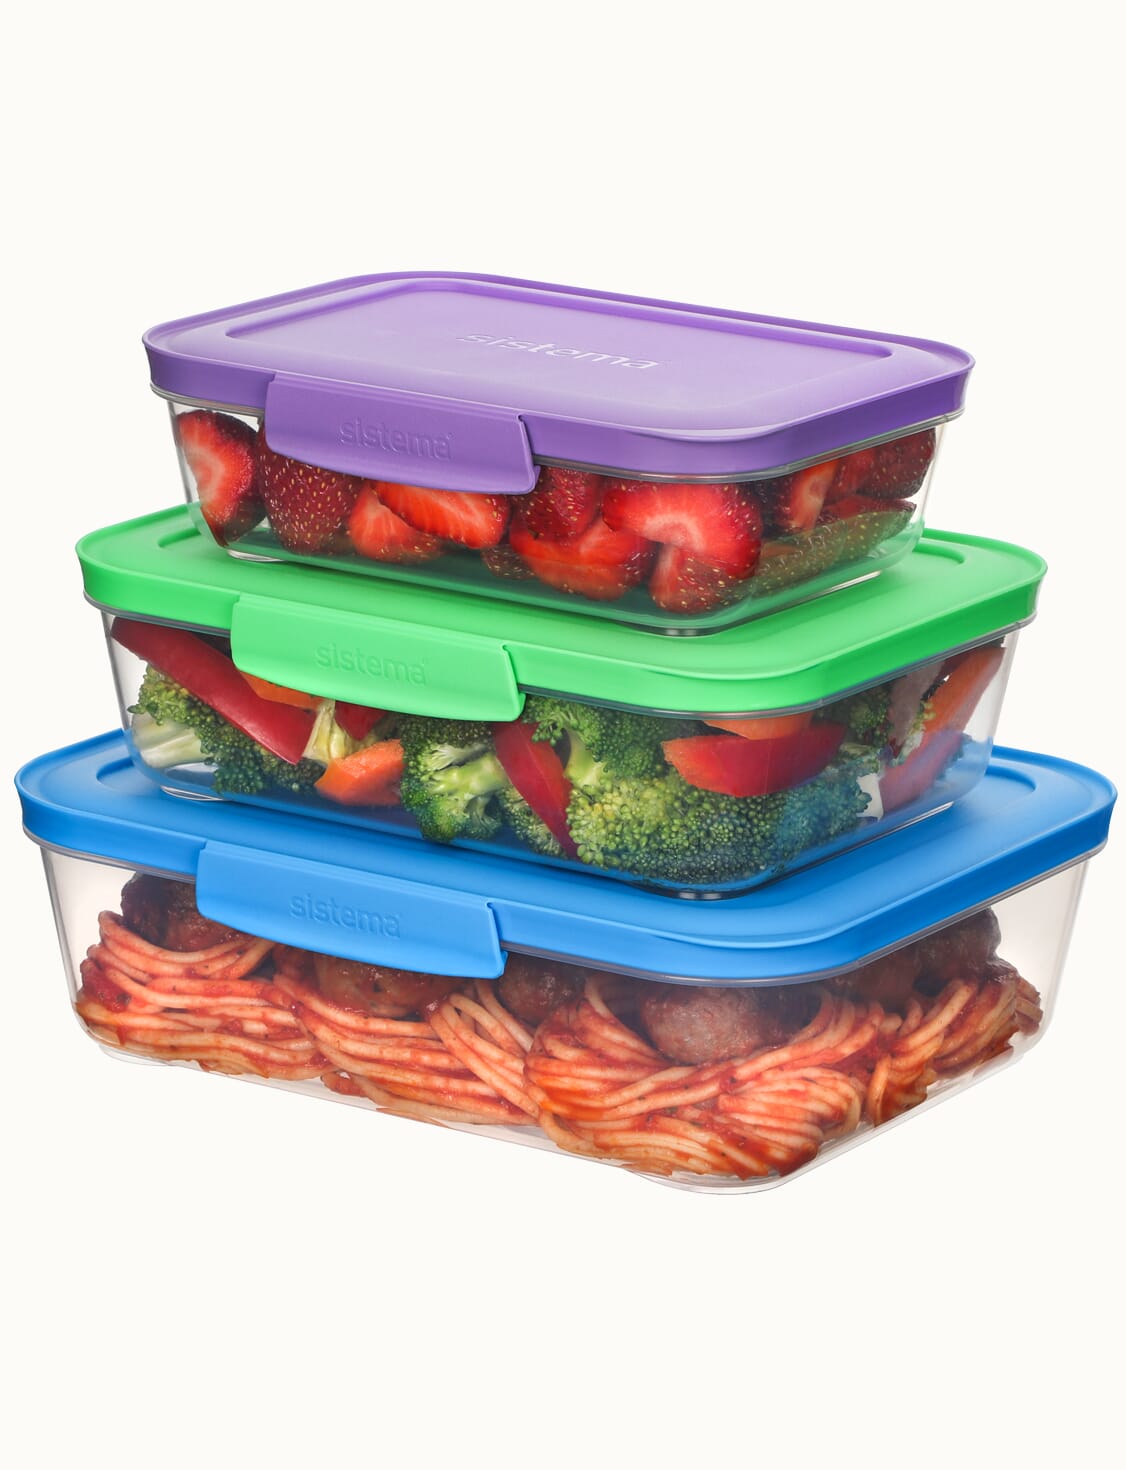 Sistema Nest It Food Containers, 3 pk - Fred Meyer